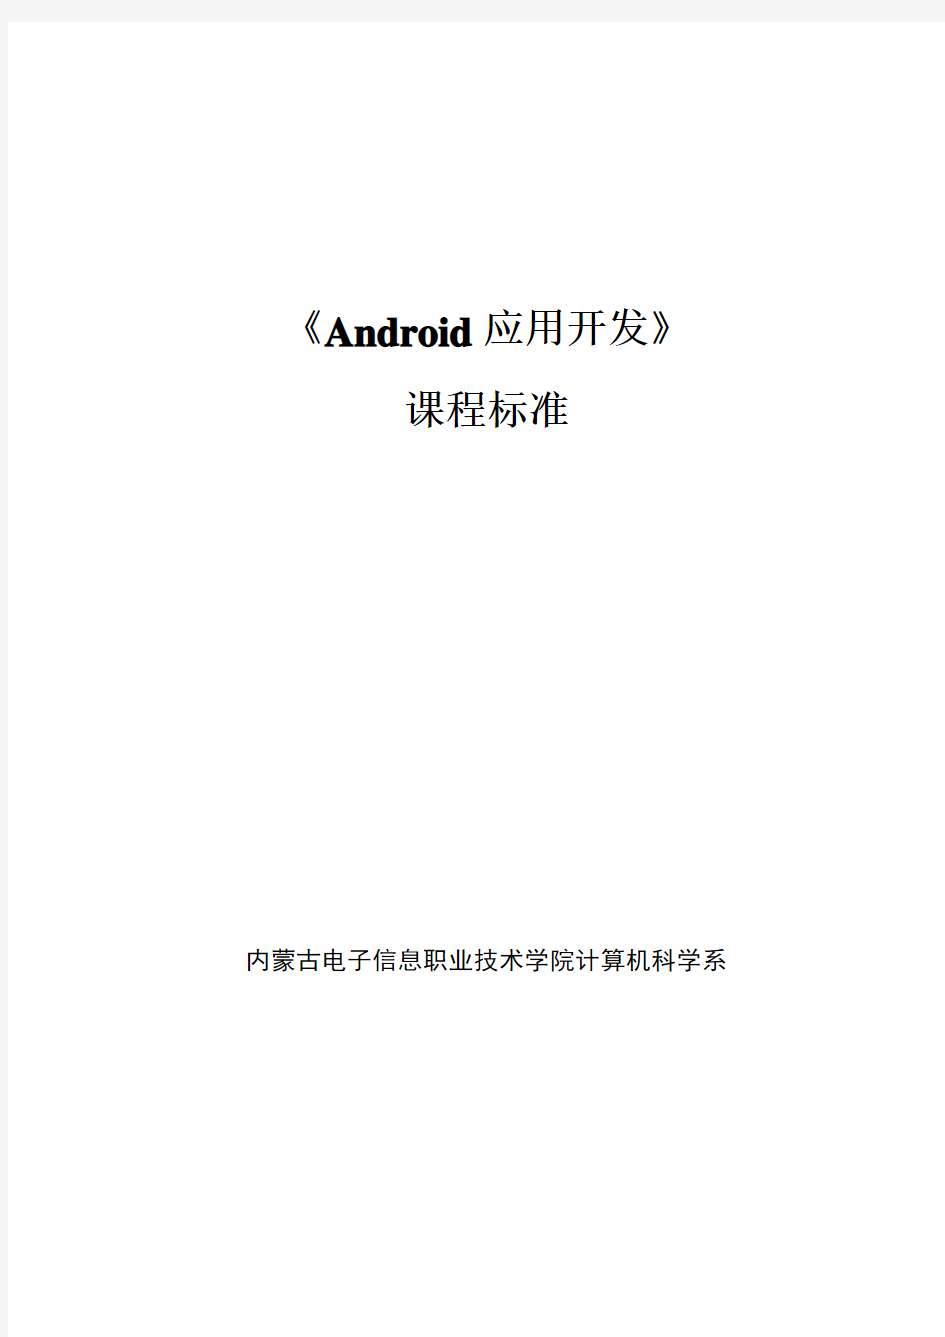 《Android应用开发》课程标准